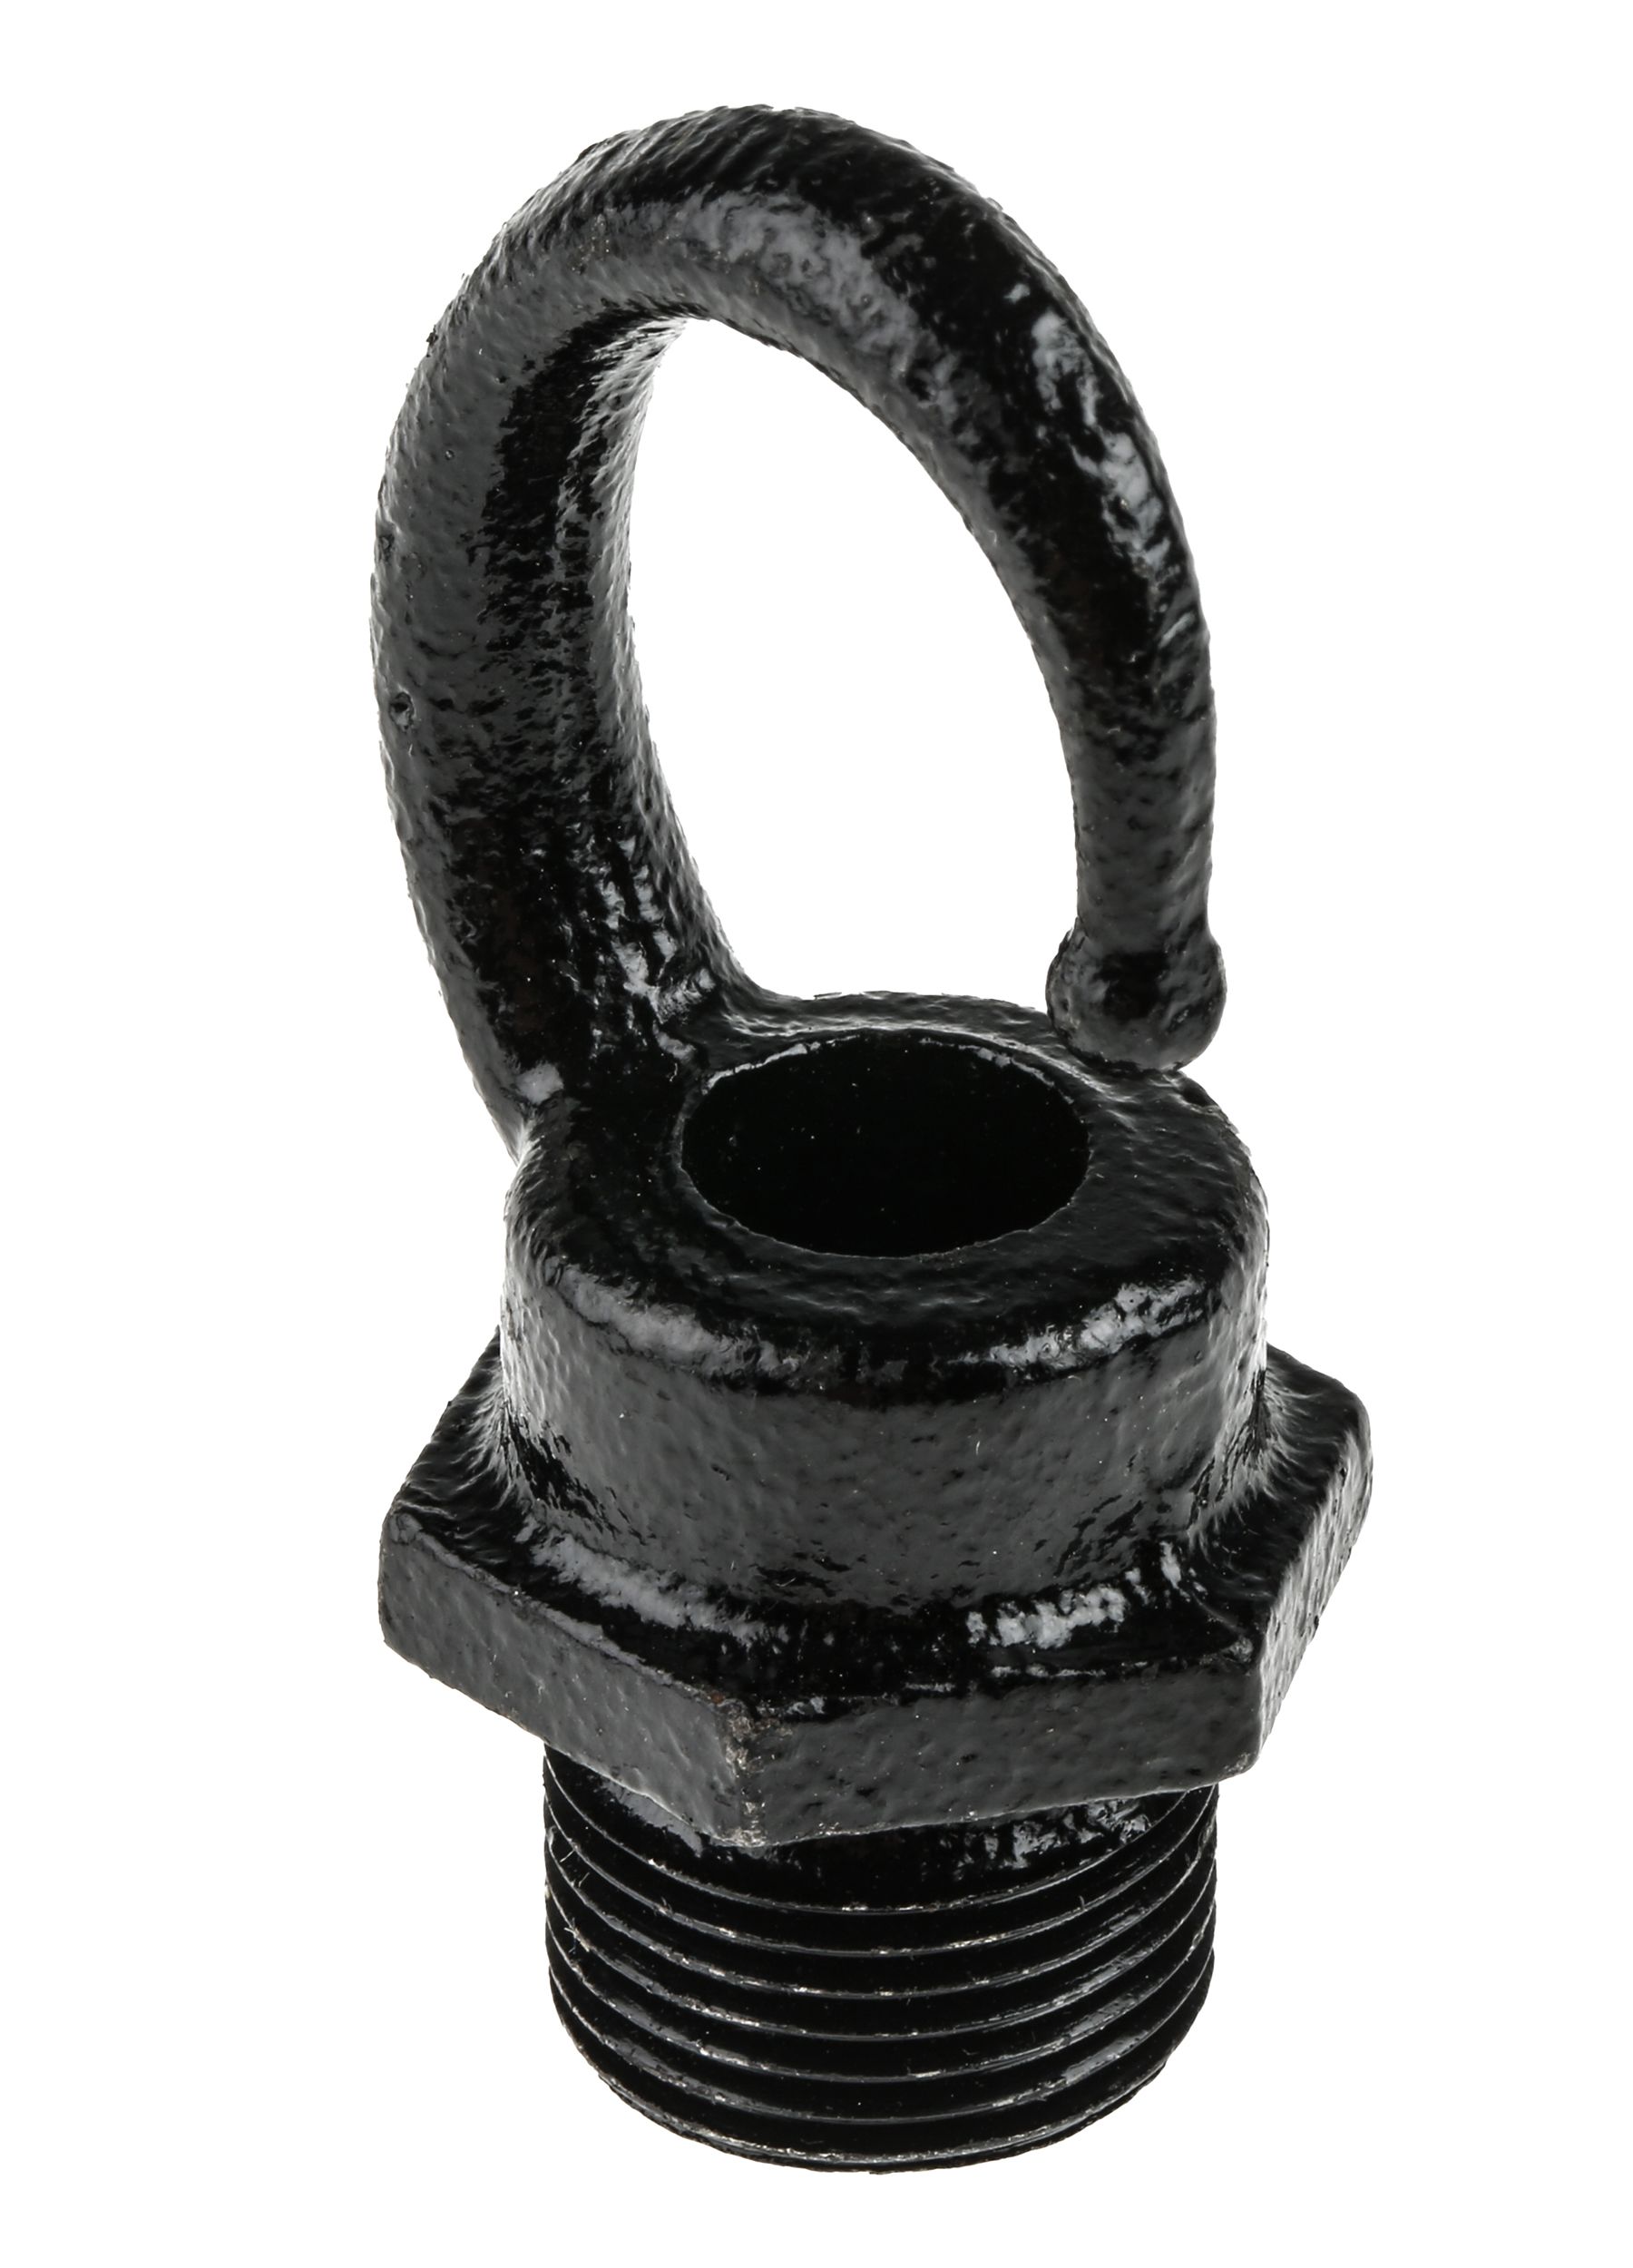 RS PRO Male Hook Conduit Fitting, Black 20mm nominal size